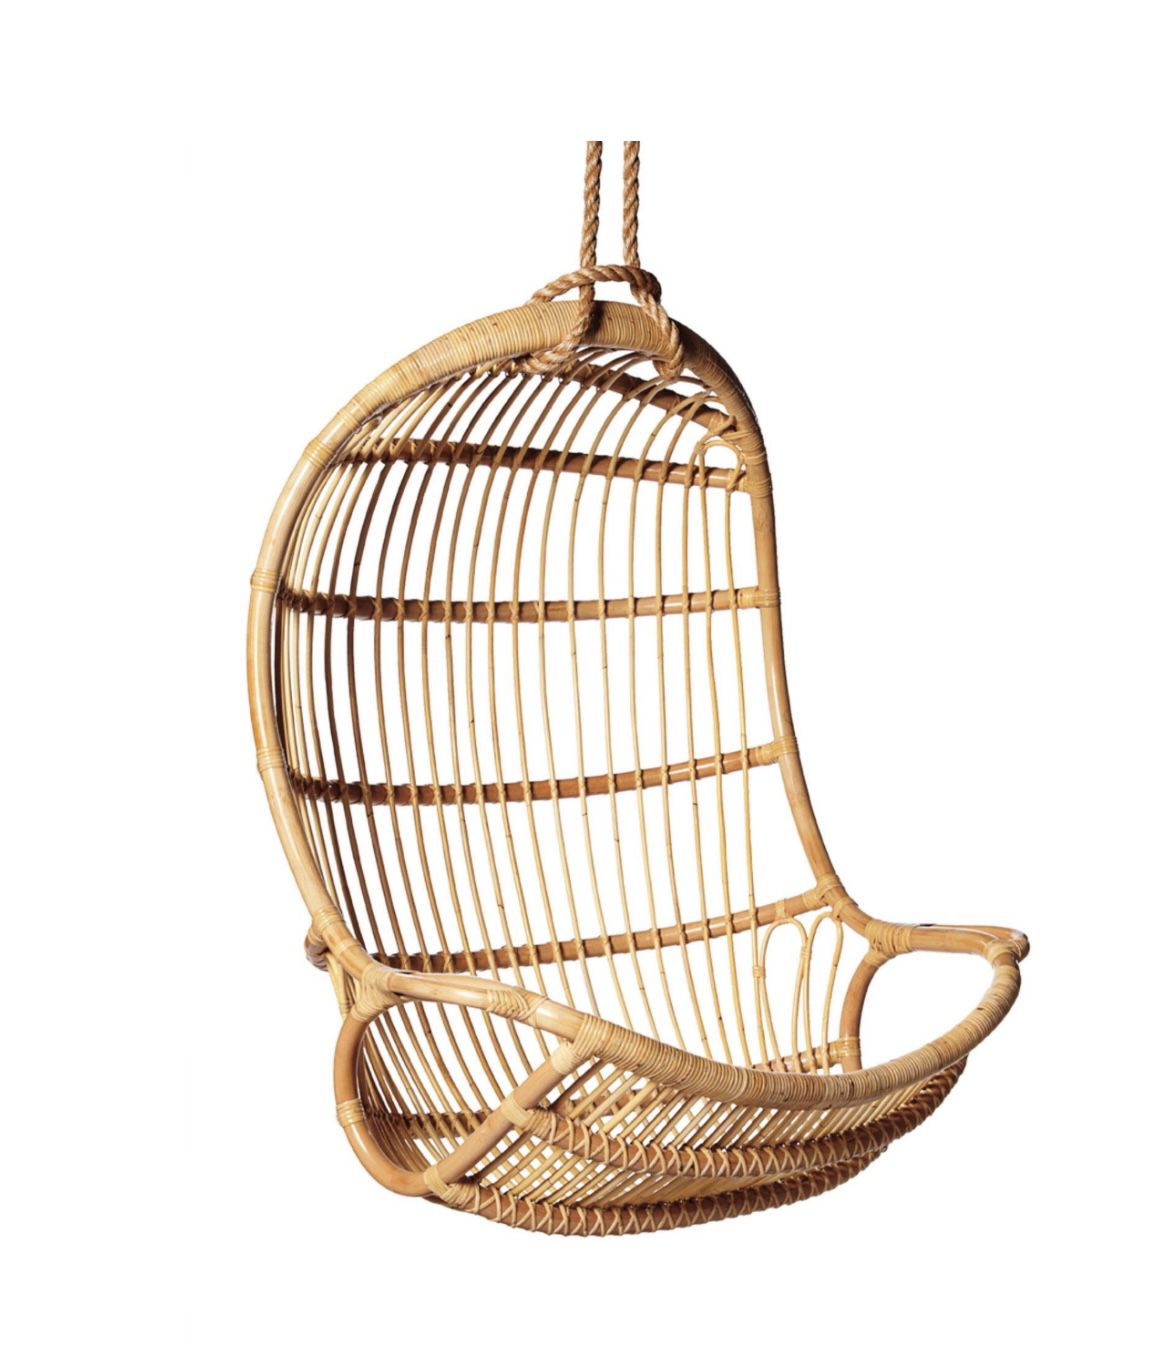 Hanging Chair - Serena & Lily BRAND NEW